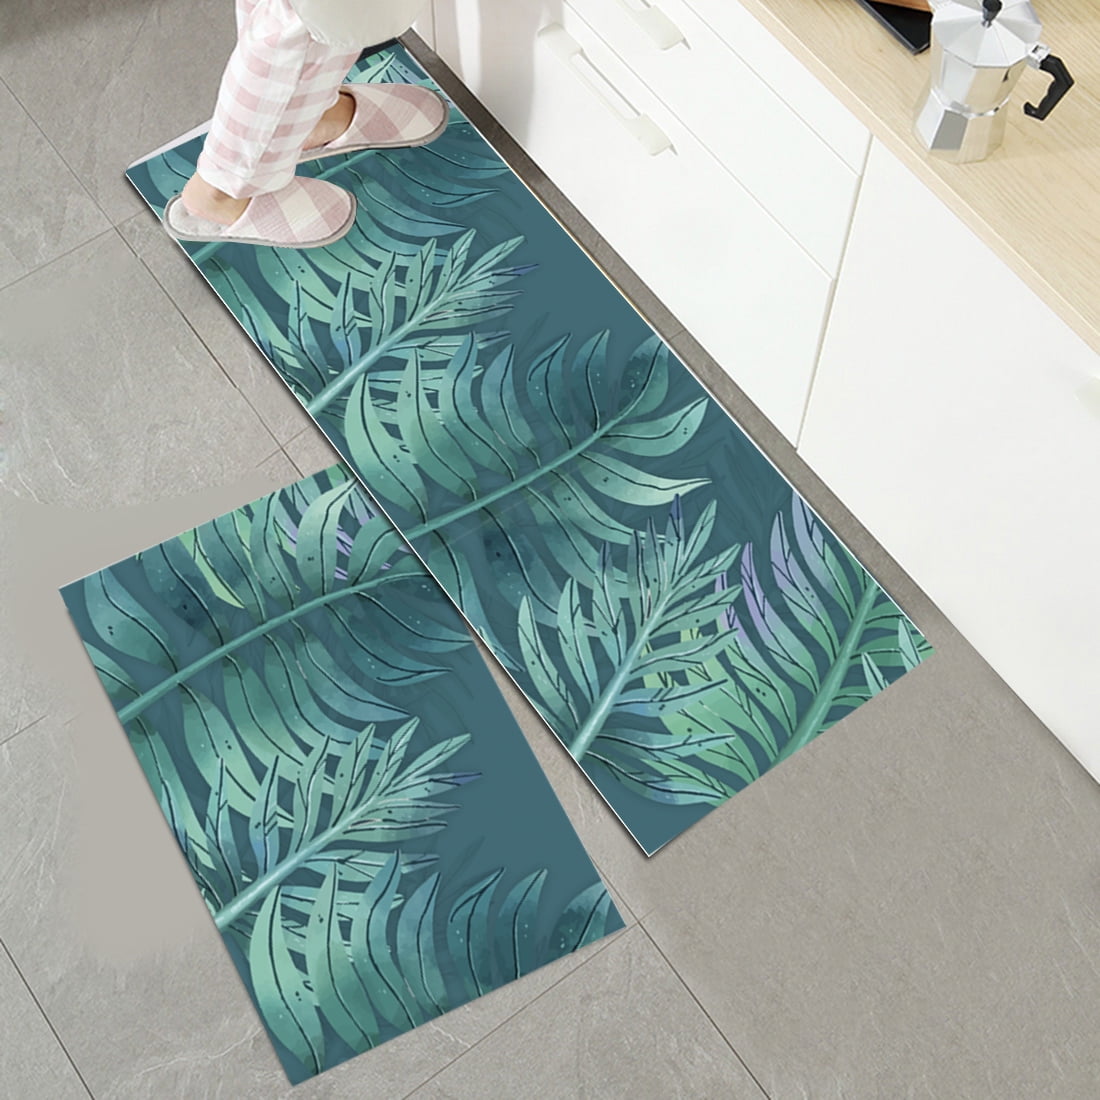 Details about   Laundry room rug waterproof and anti-fatigue pvc leather floor mat 